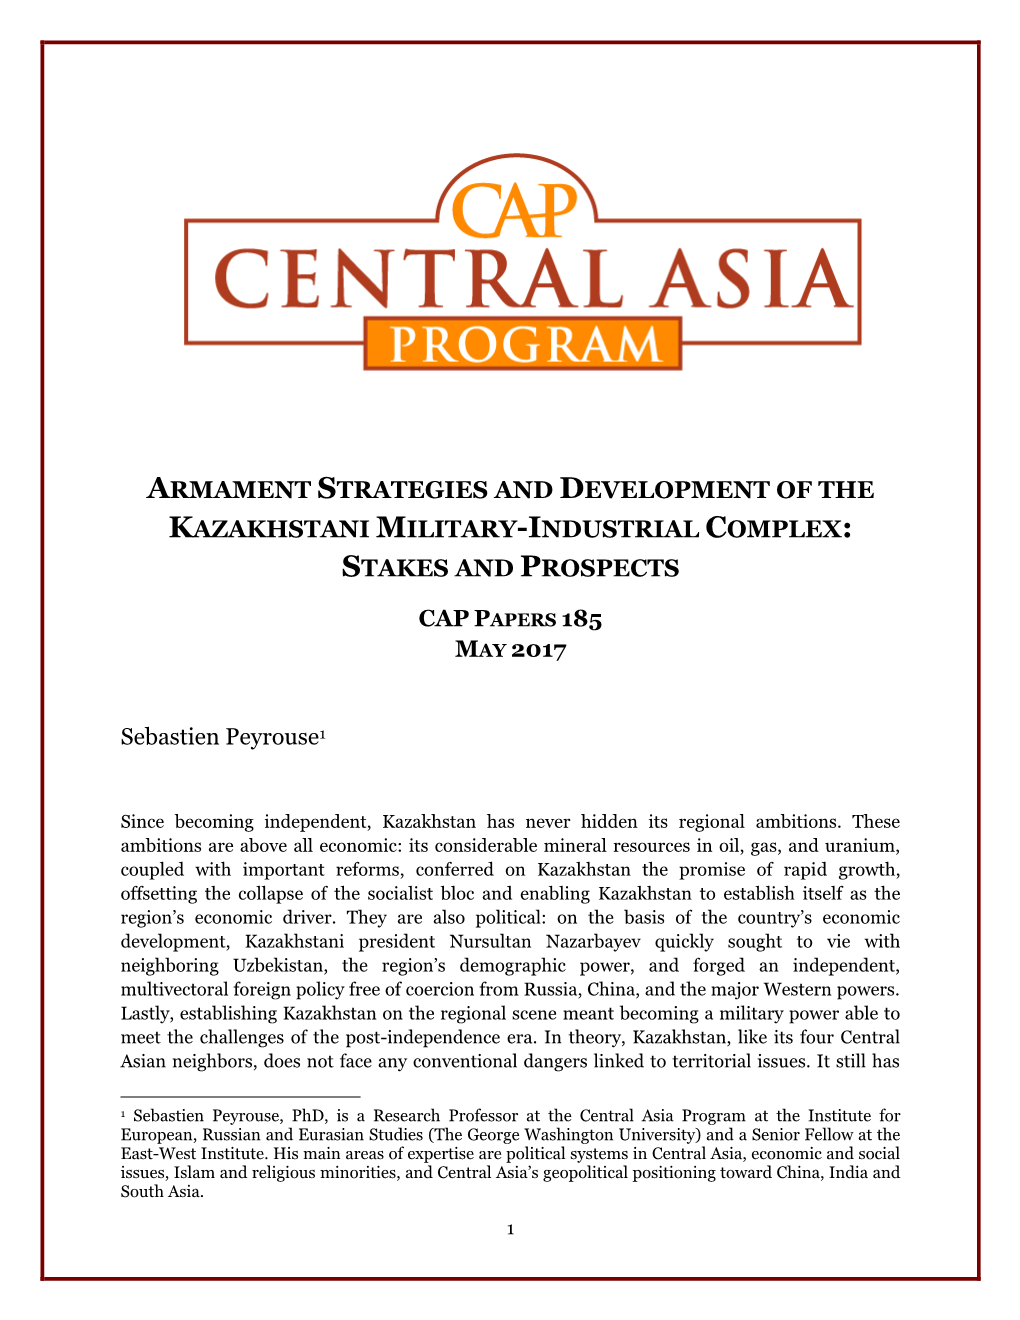 Armament Strategies and Development of the Kazakhstani Military-Industrial Complex: Stakes and Prospects